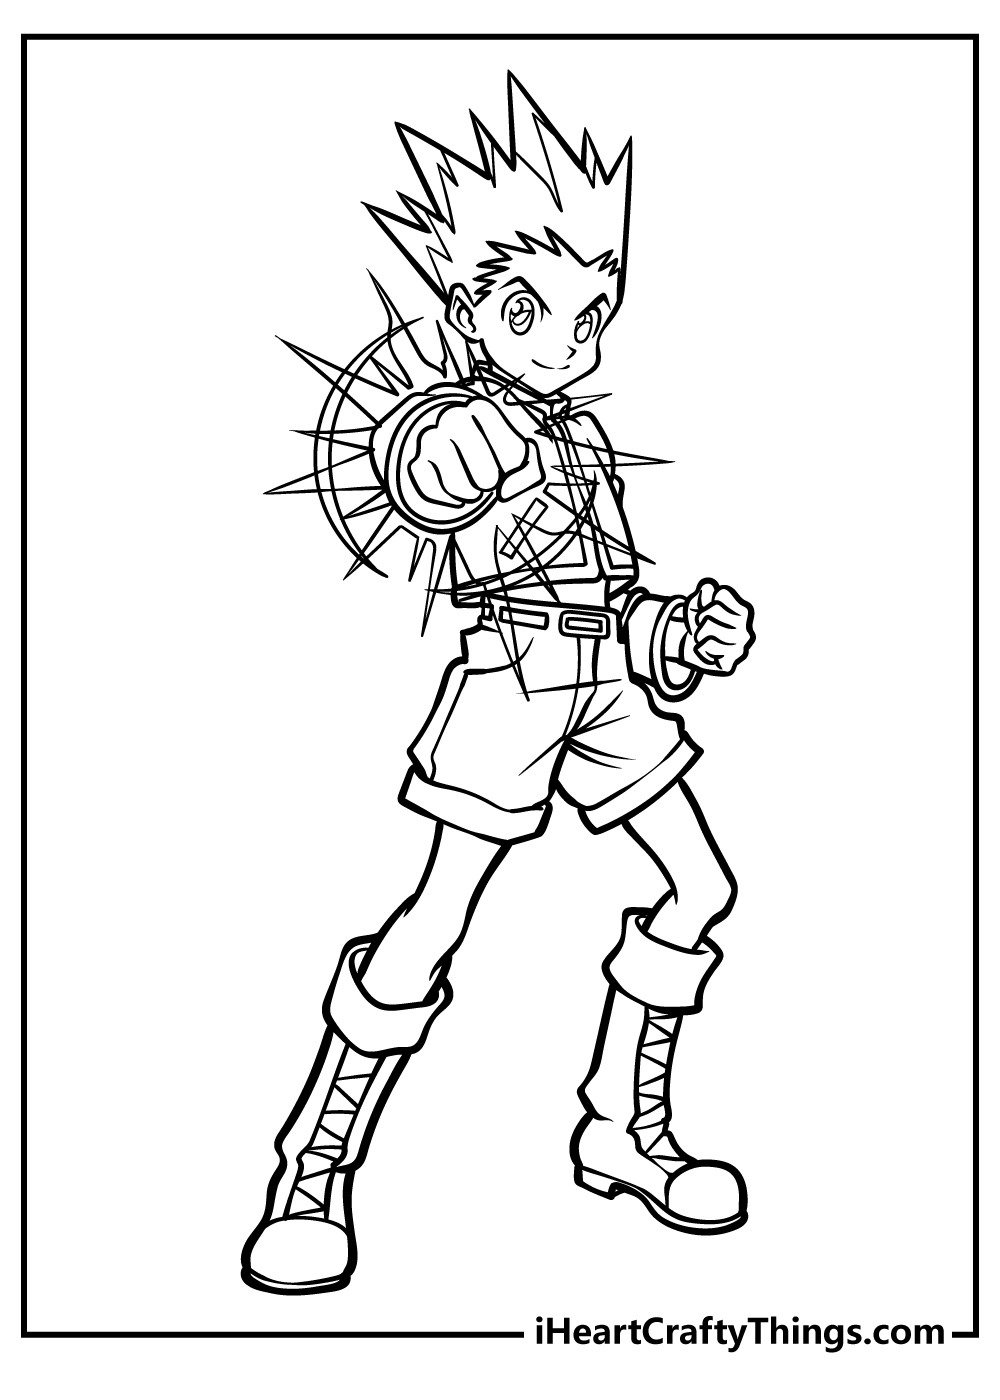 Anime Characters Coloring Pages - Coloring Home